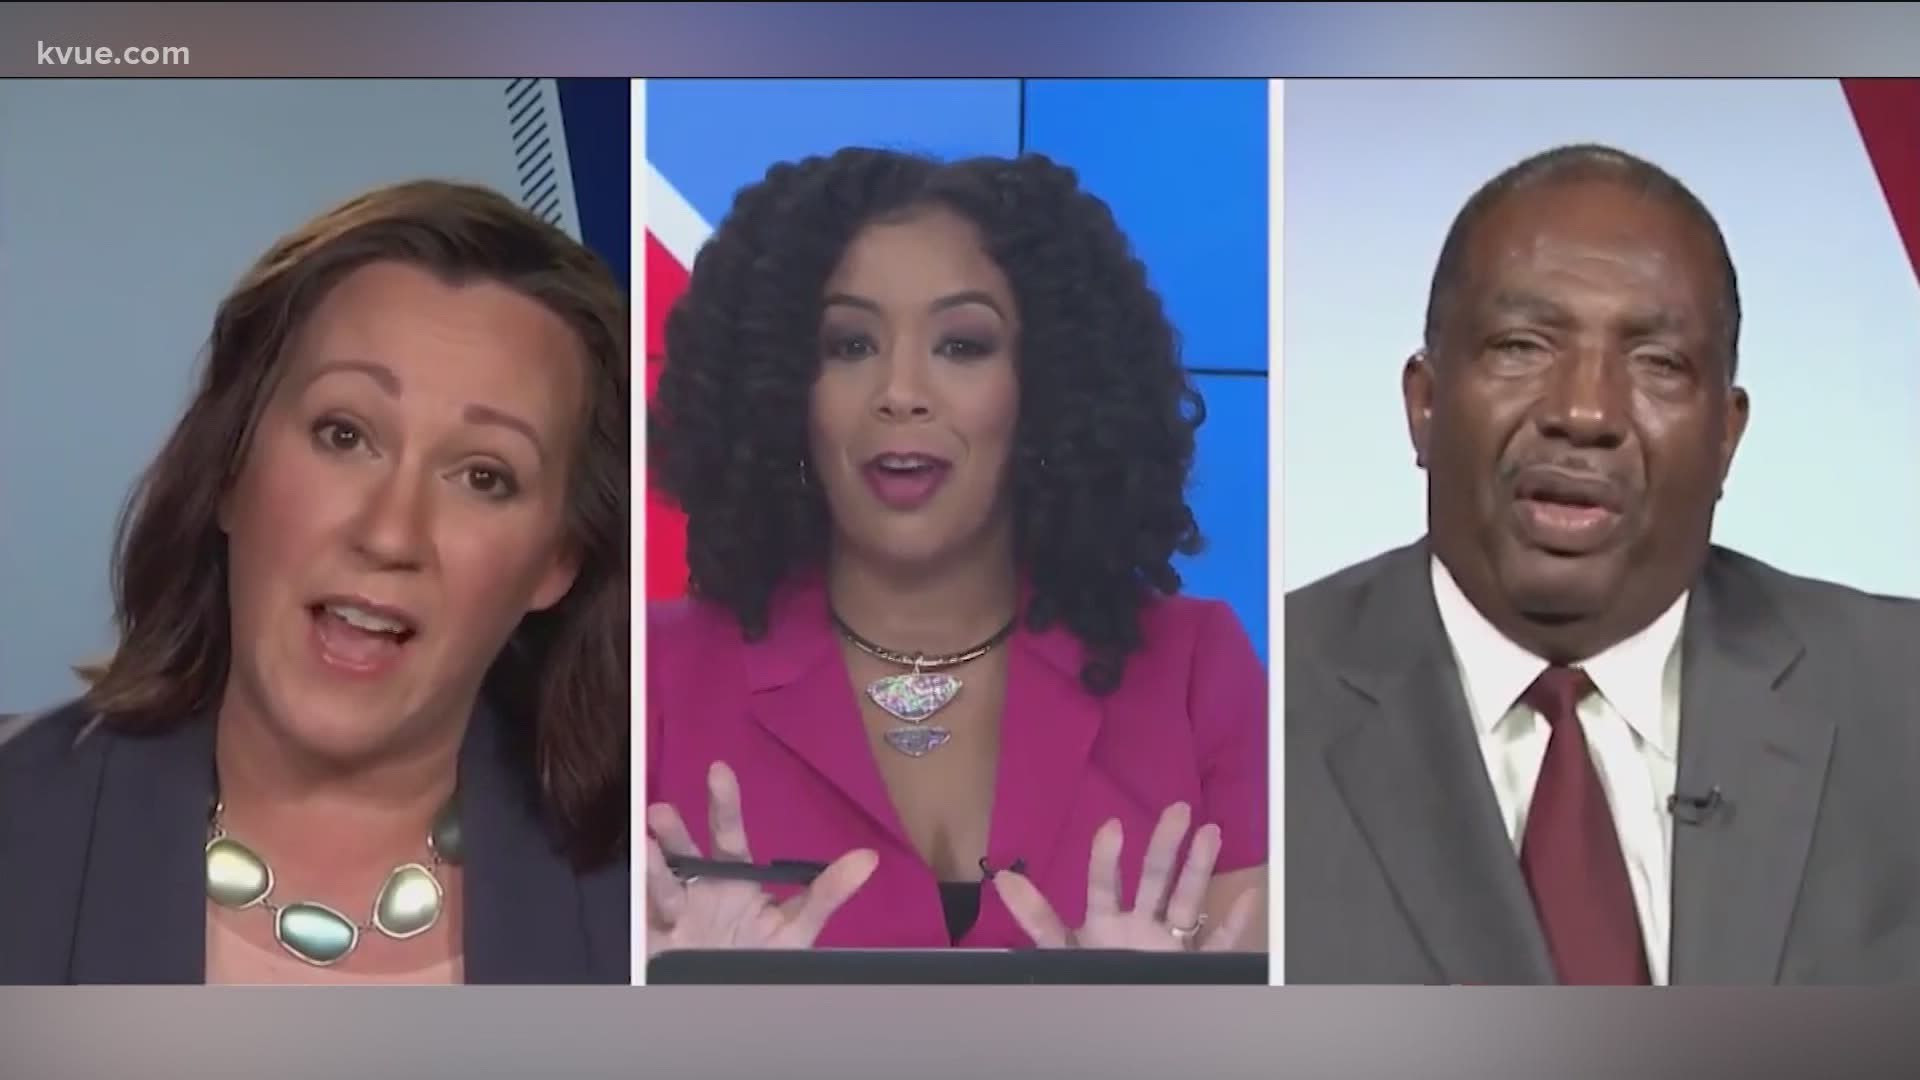 Two Democrats are competing to challenge U.S. Sen. John Cornyn in November. KVUE hosted a debate between MJ Hegar and State Sen. Royce West – and things got tense.